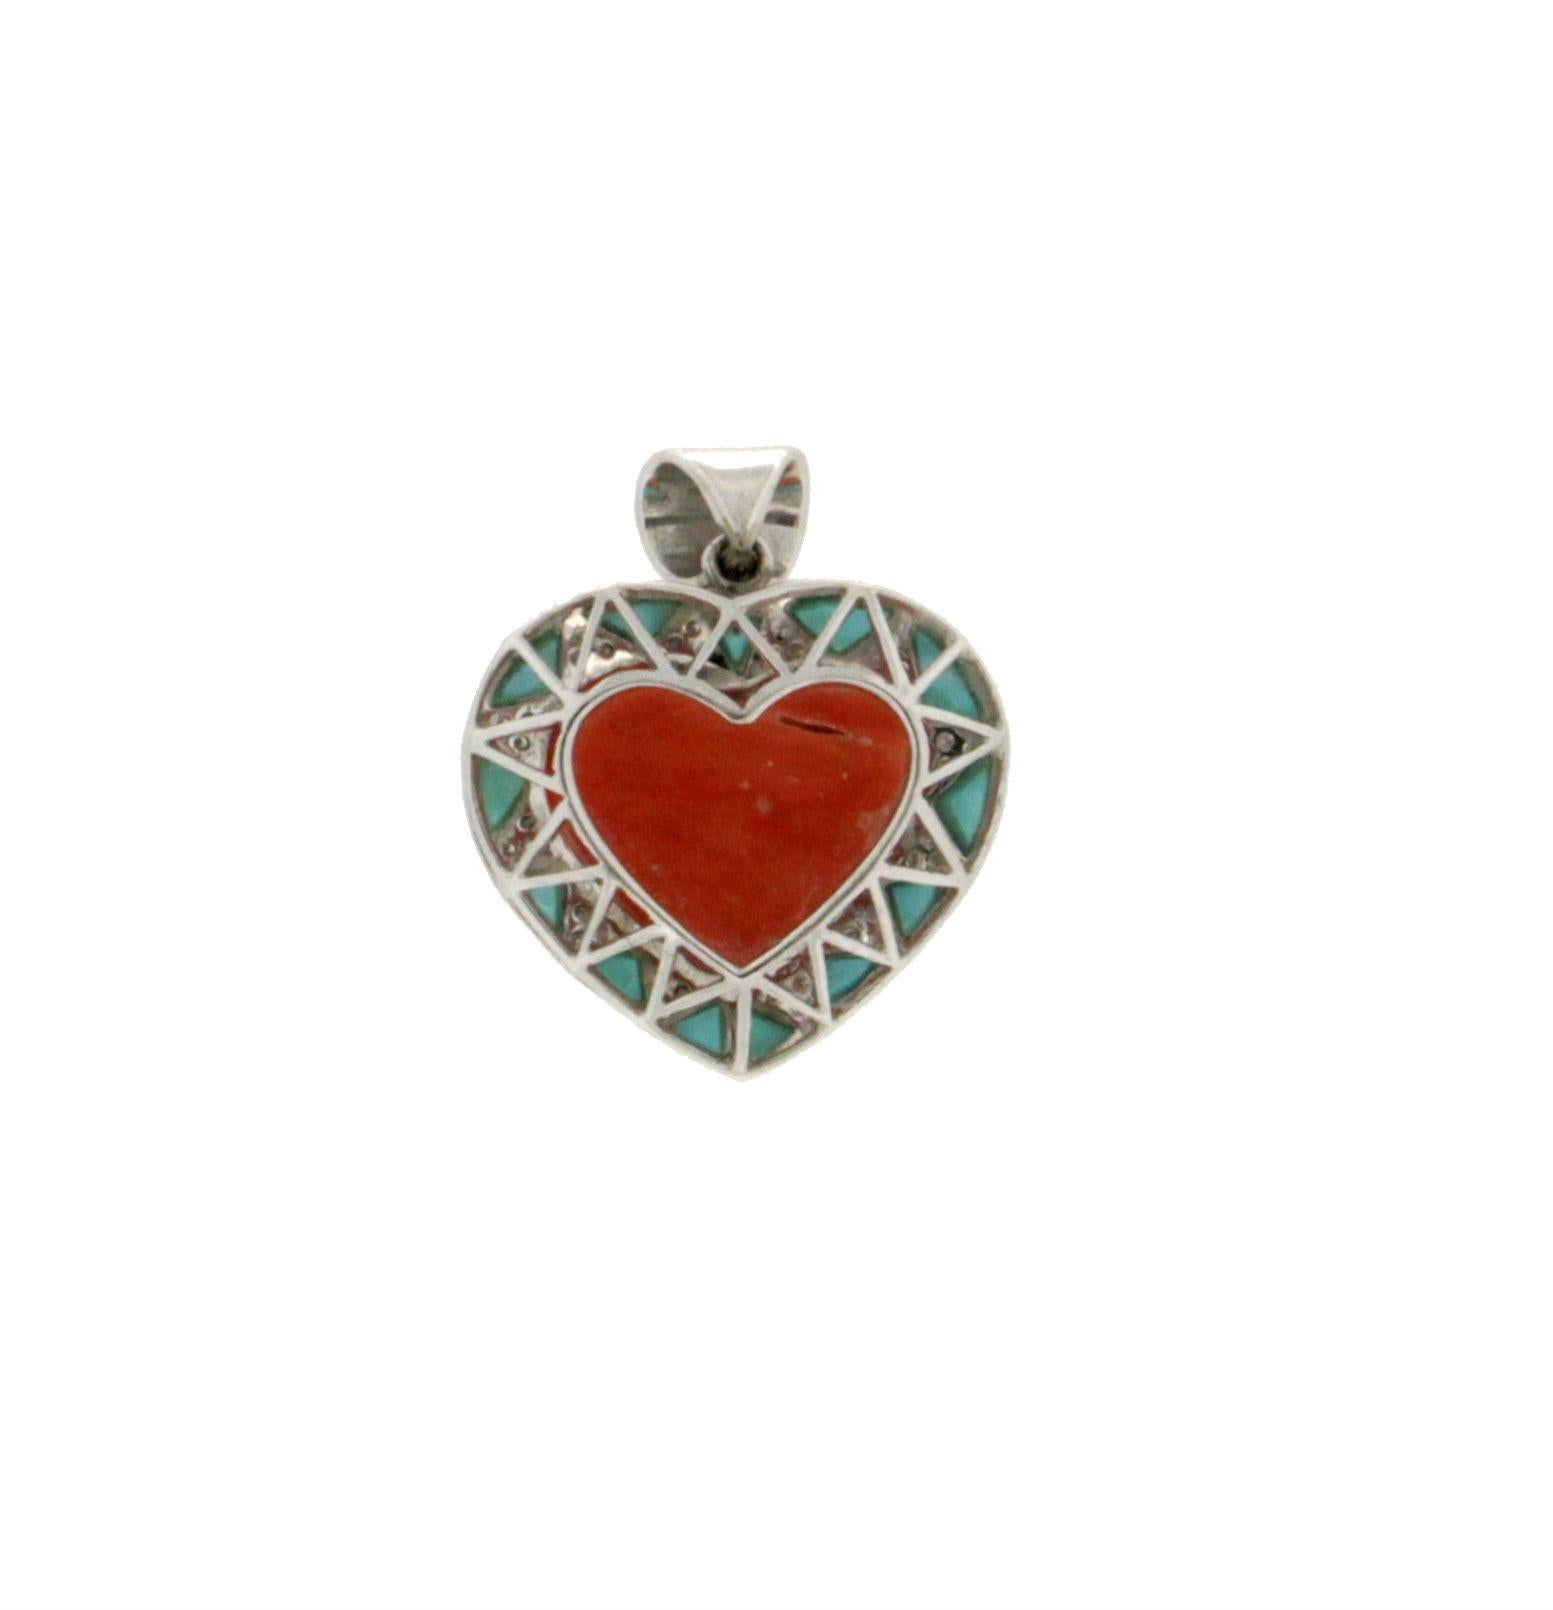 Coral Heart 18 Karat White Gold Mounted With Turquoise And Diamonds Pendant Necklace

Pendant weight 7.20 grams
Diamonds weight 0.22 karat
Coral weight 2.30 grams
(the price is without chain)